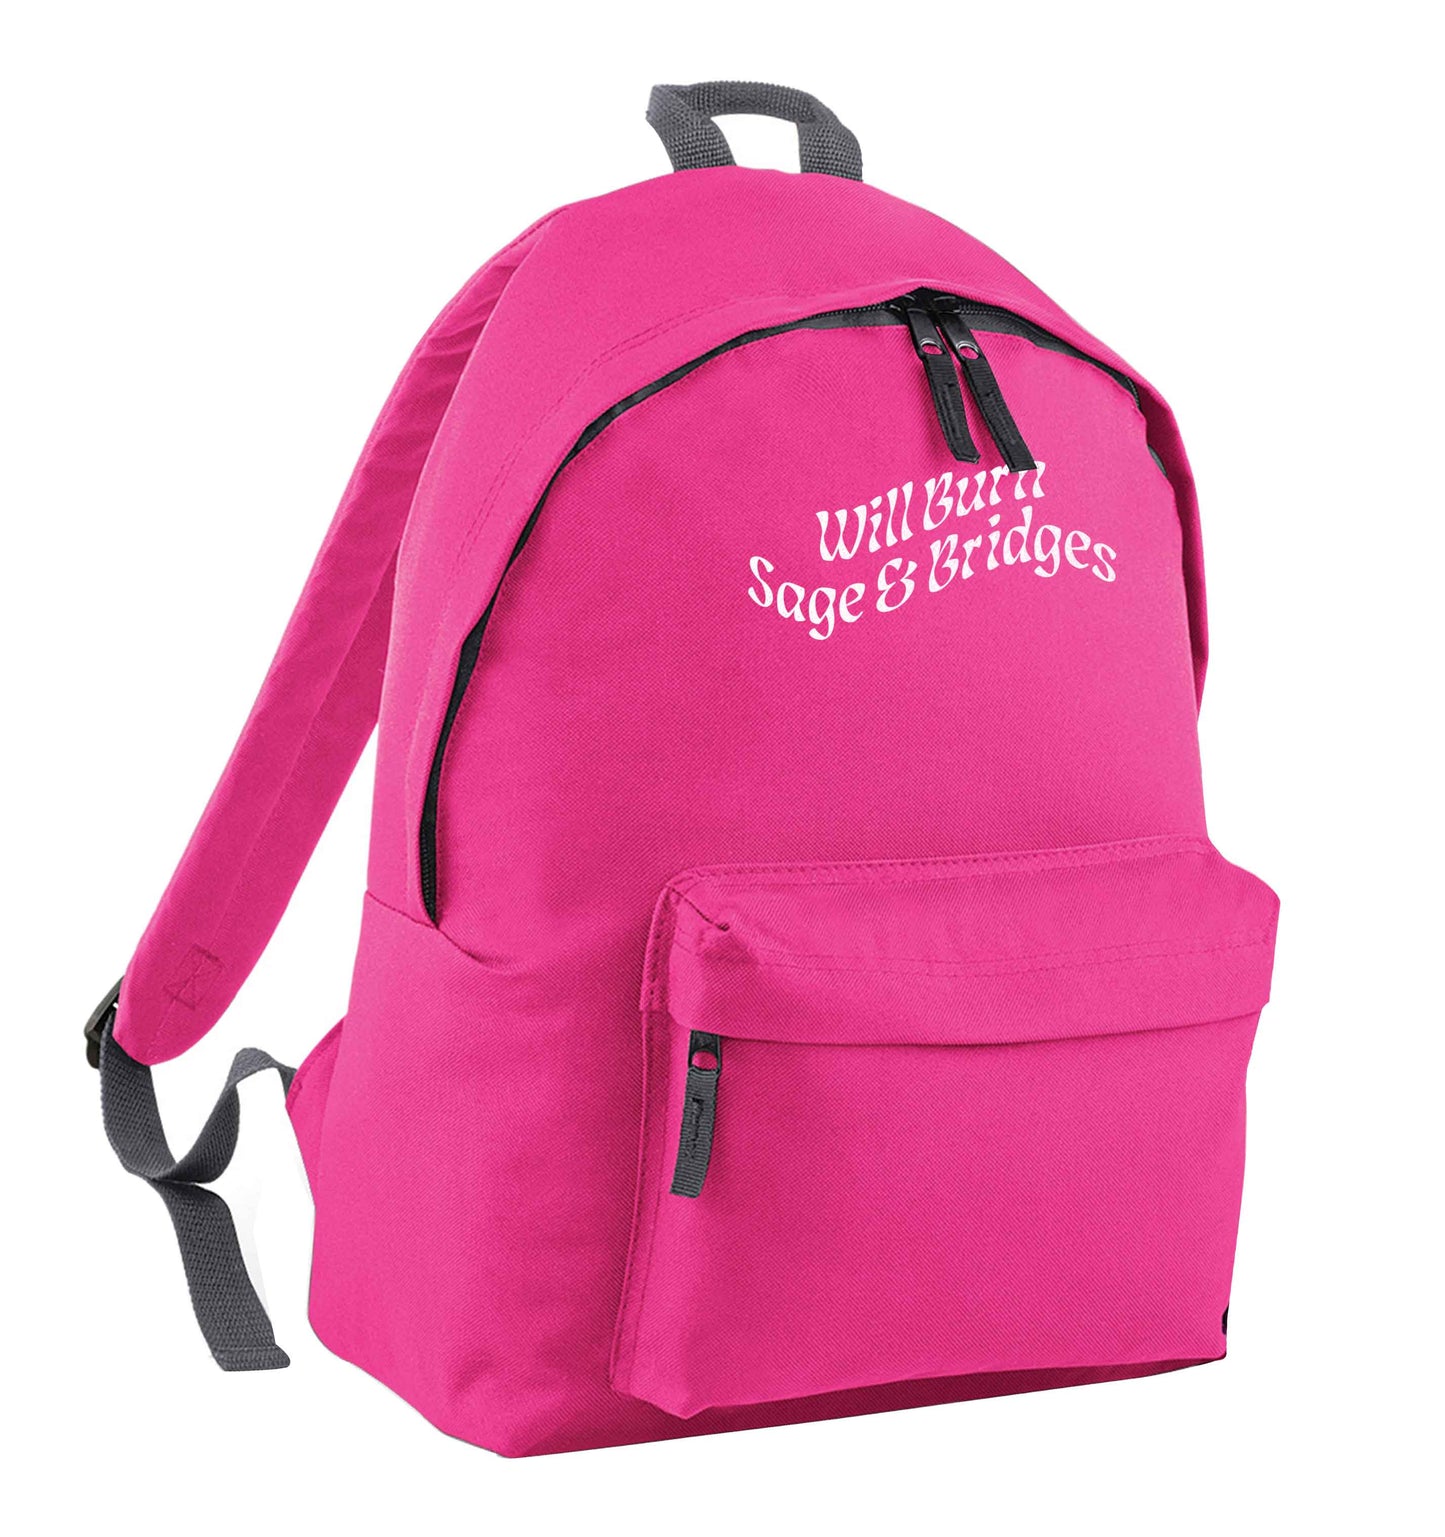 Will burn bridges and sage pink adults backpack